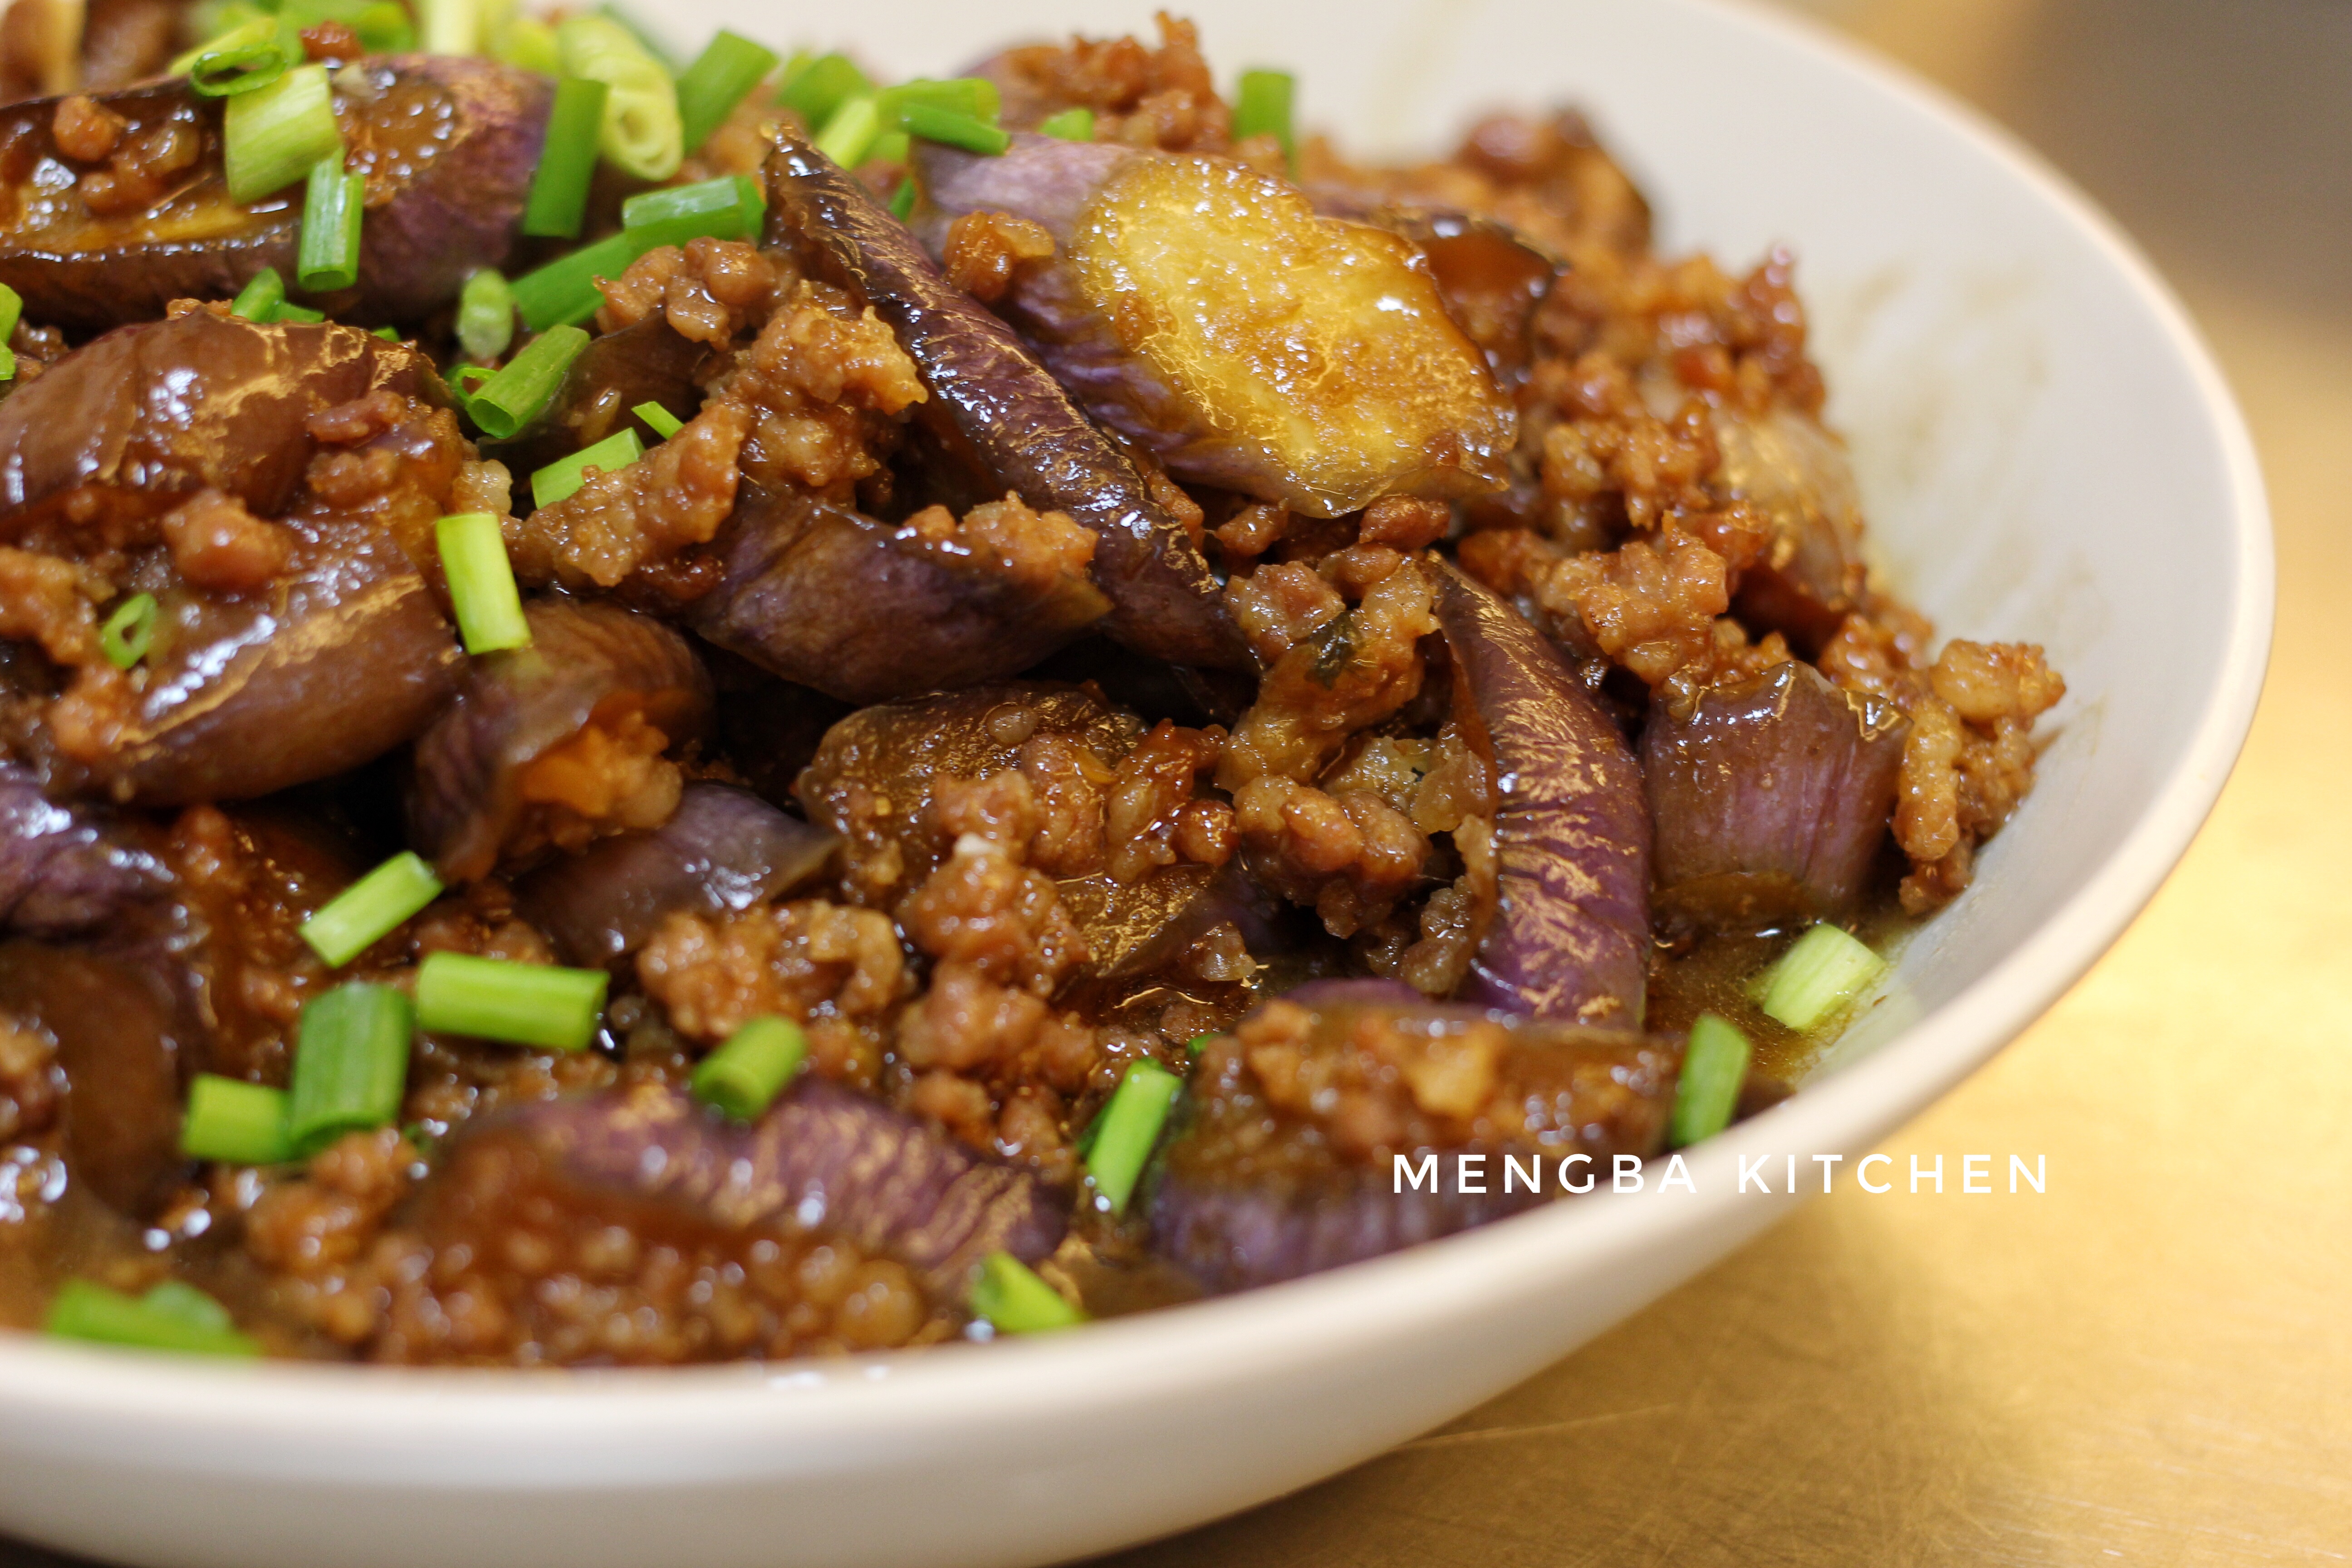 
Leave the way of # of aubergine of ground meat of meal № 1#